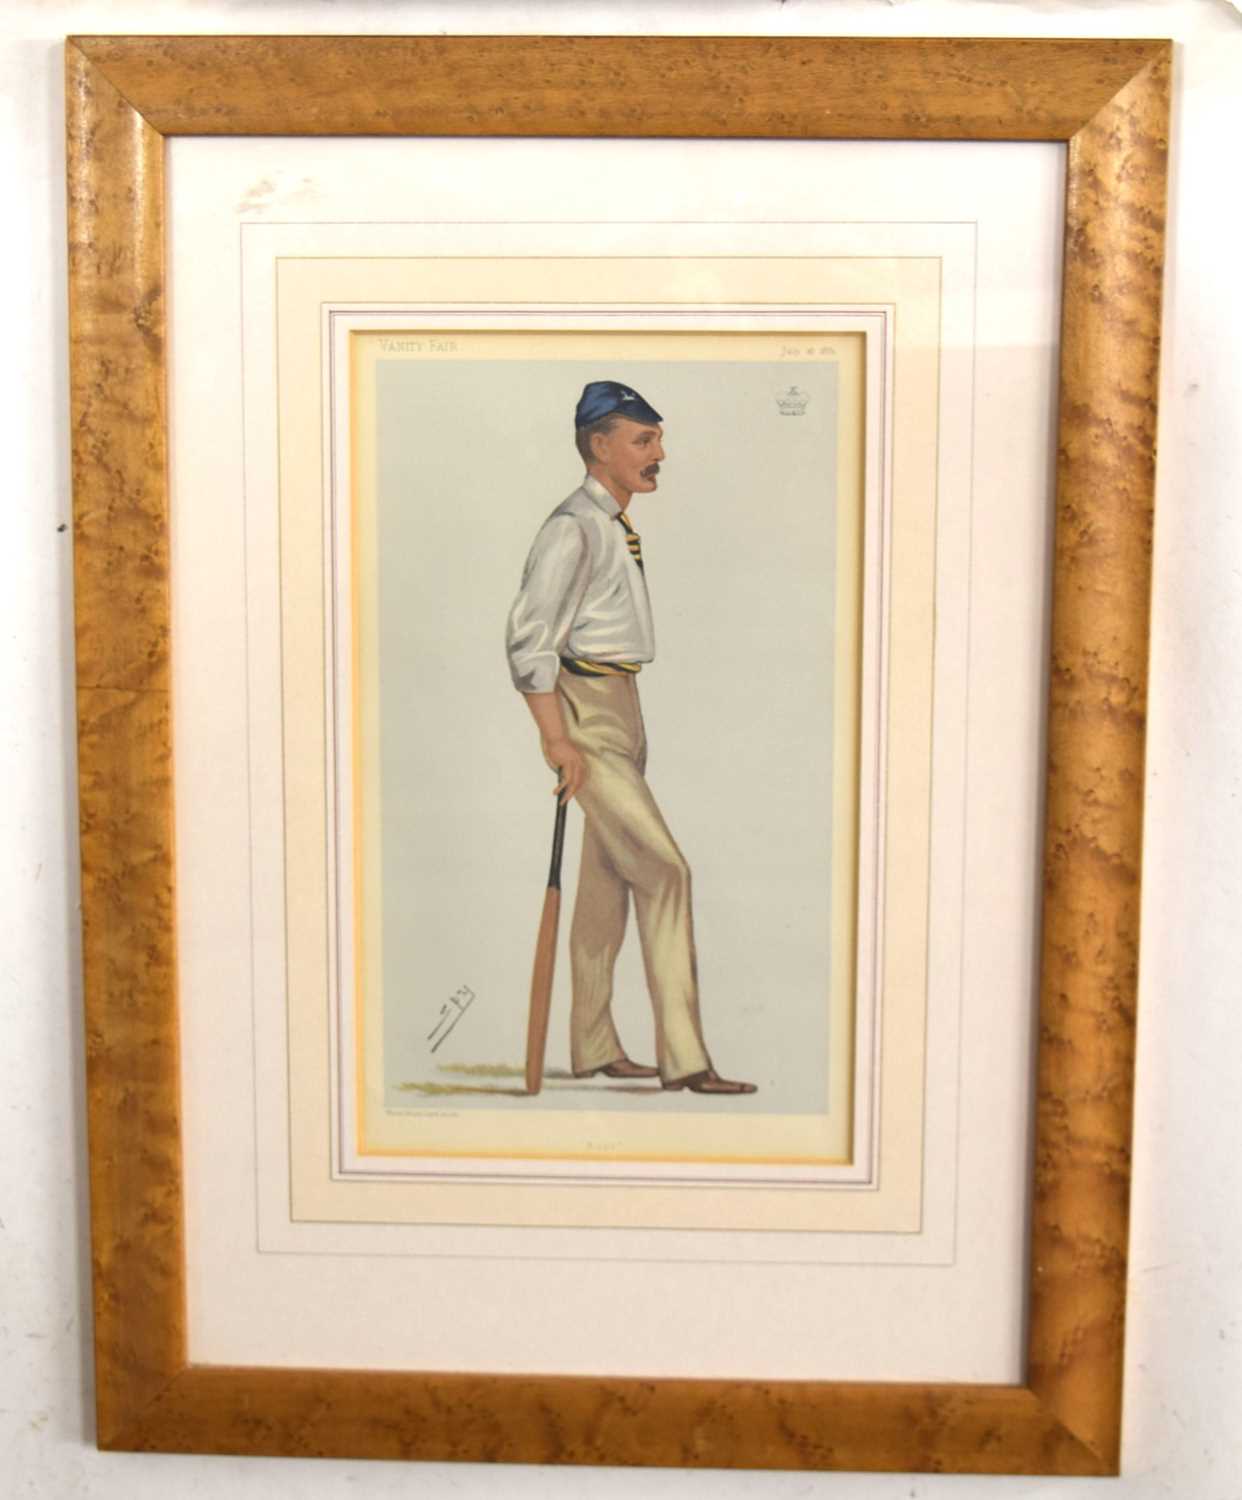 Framed Vanity Fair chromolithograph cricket caricature dated July 16th 1881 – “Kent” – Lord Harris